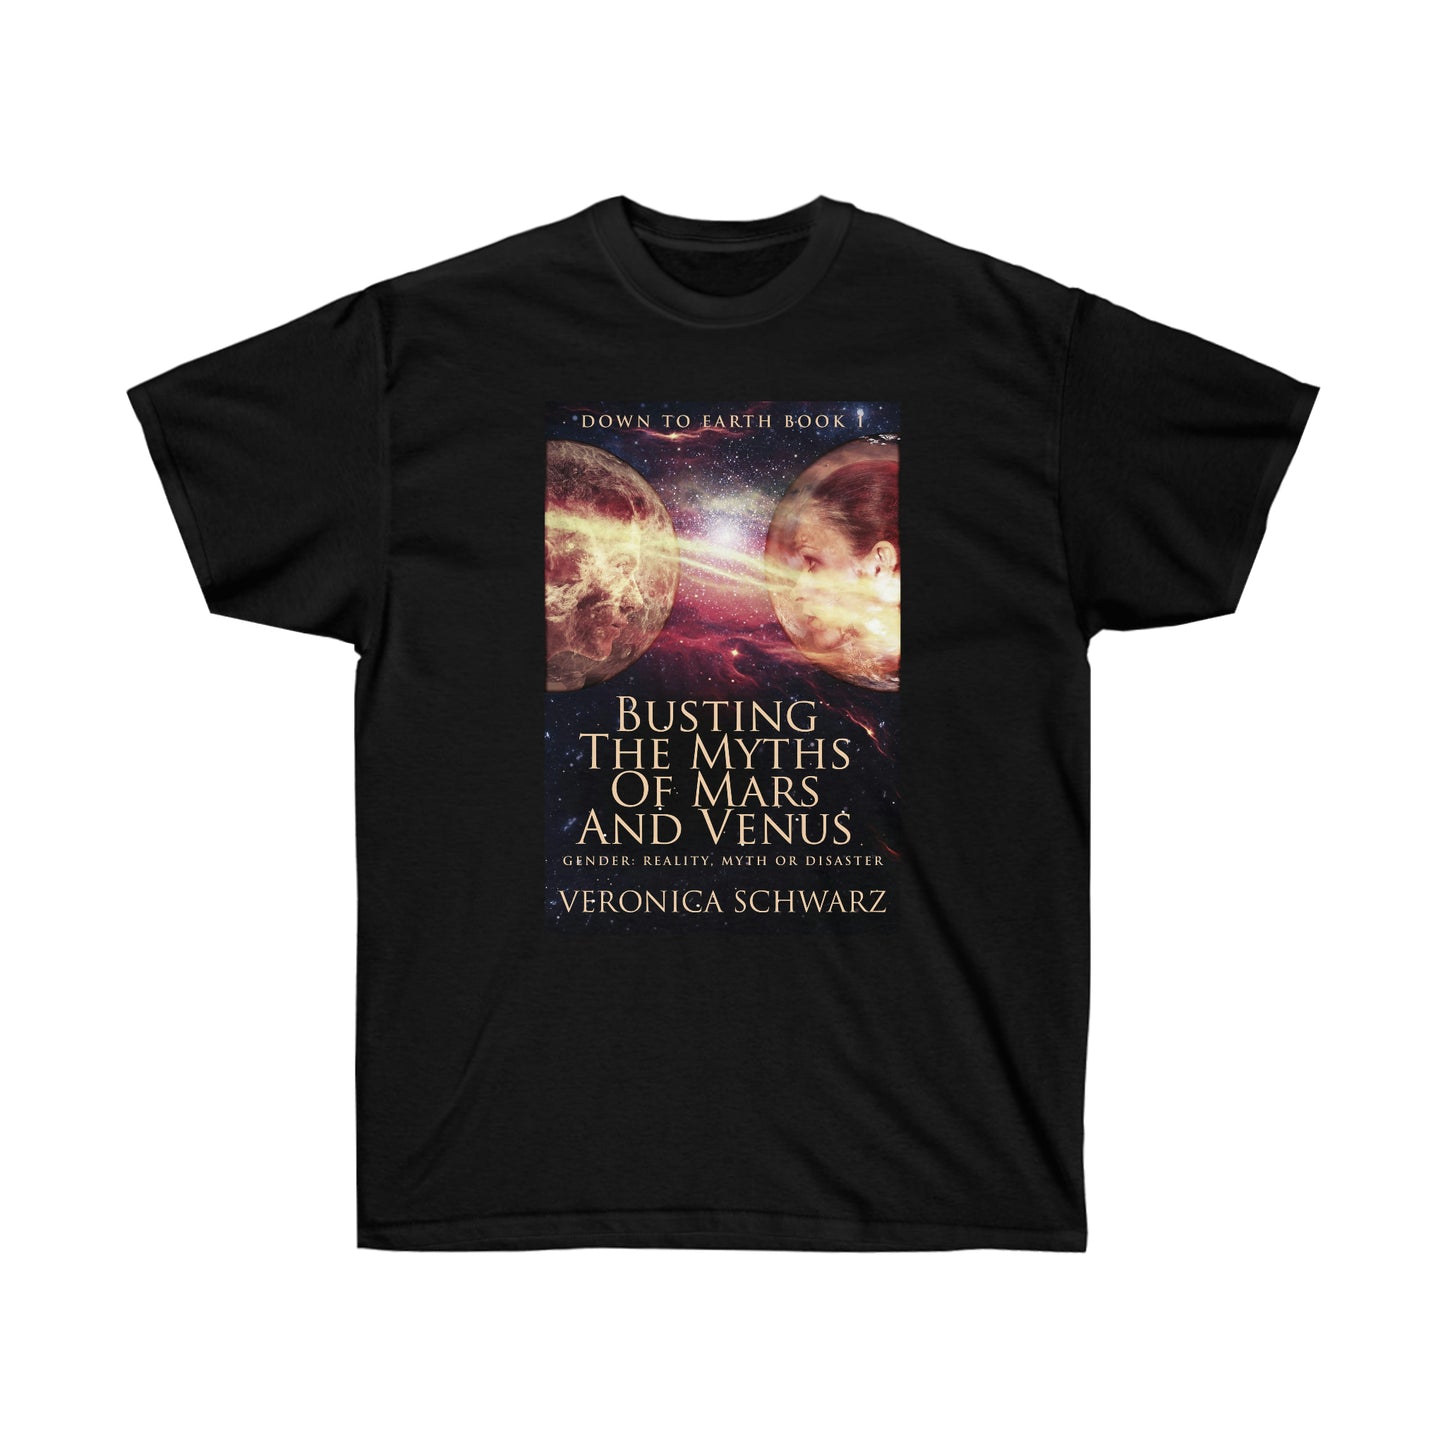 Busting The Myths Of Mars And Venus - Unisex T-Shirt